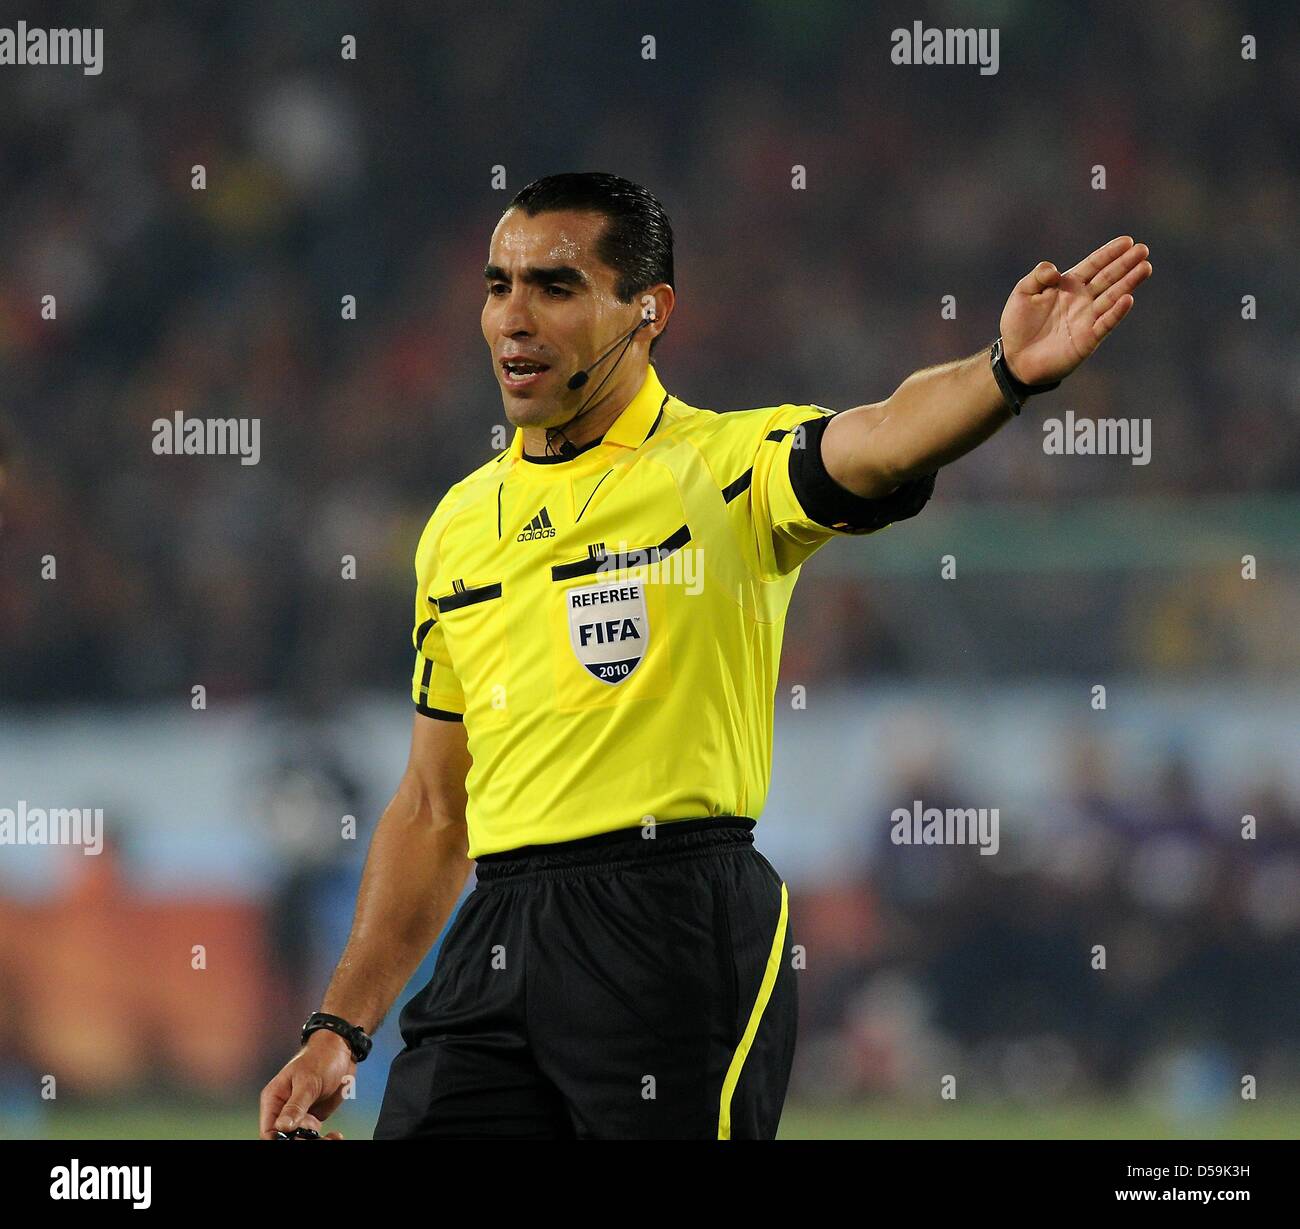 Mexican referee Marco Rodriguez gestures during the 2010 FIFA World Cup group H match between Chile and Spain at Loftus Versfeld Stadium in Pretoria, South Africa 25 June 2010. Photo: Marcus Brandt dpa - Please refer to http://dpaq.de/FIFA-WM2010-TC Stock Photo